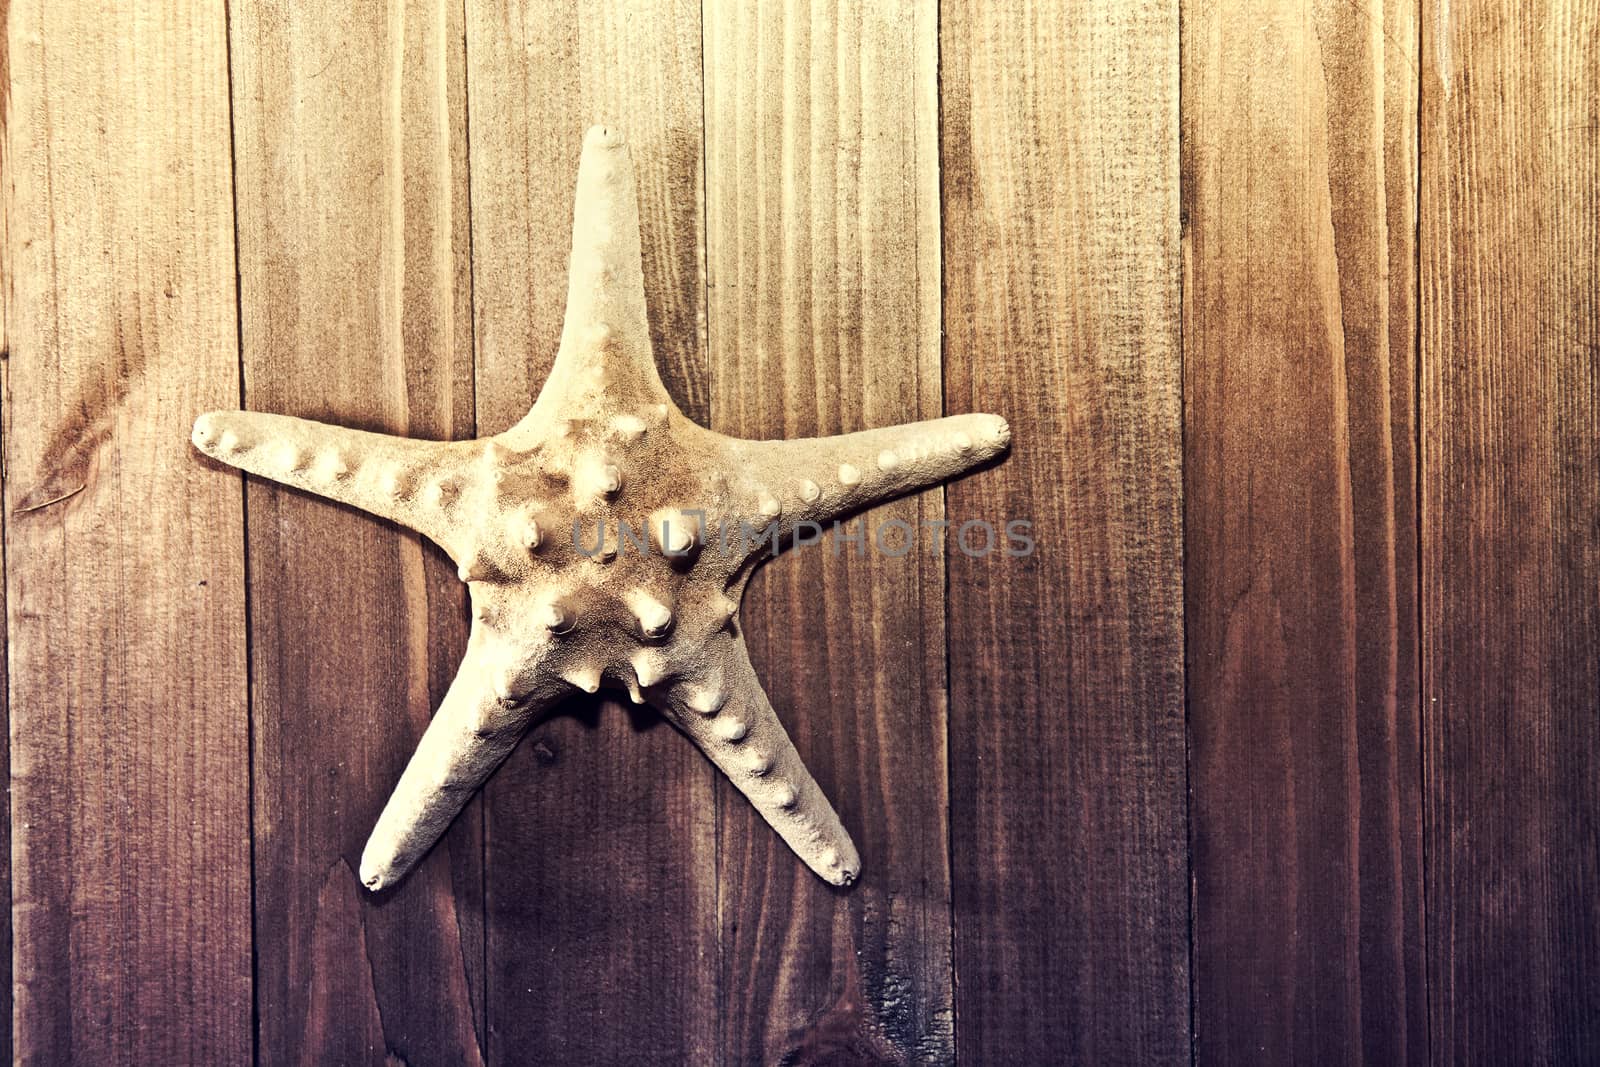 Starfish on the wooden background. Marine life. Retro vintage picture.